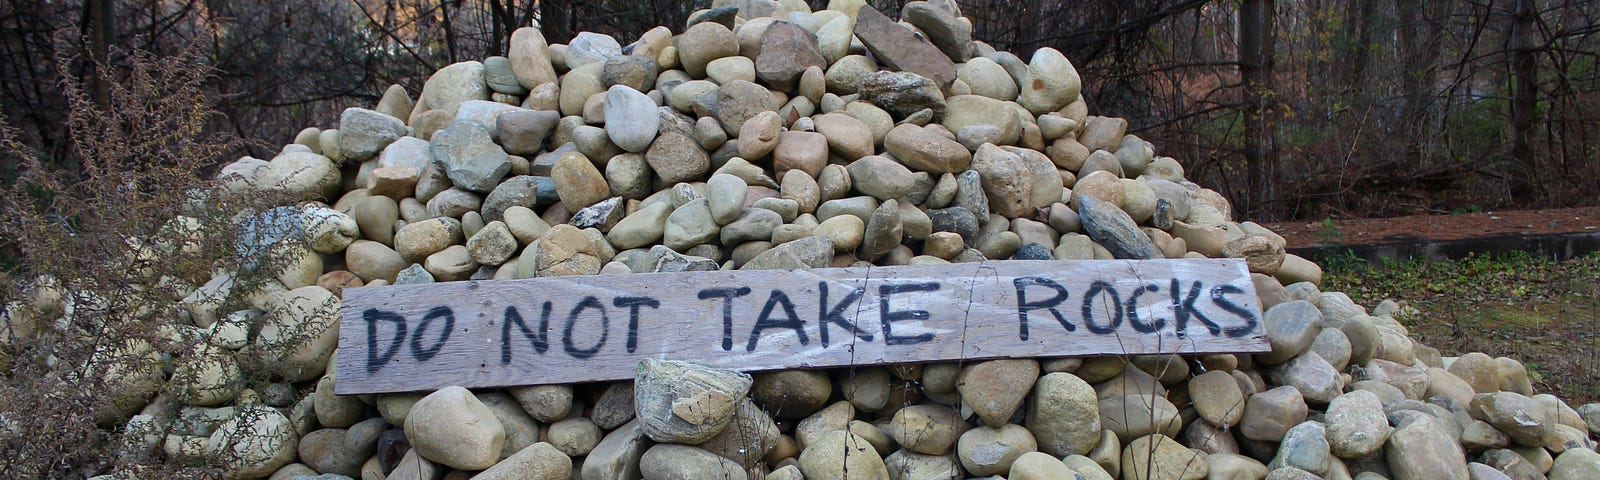 pile of rocks with sign reading do not take rocks